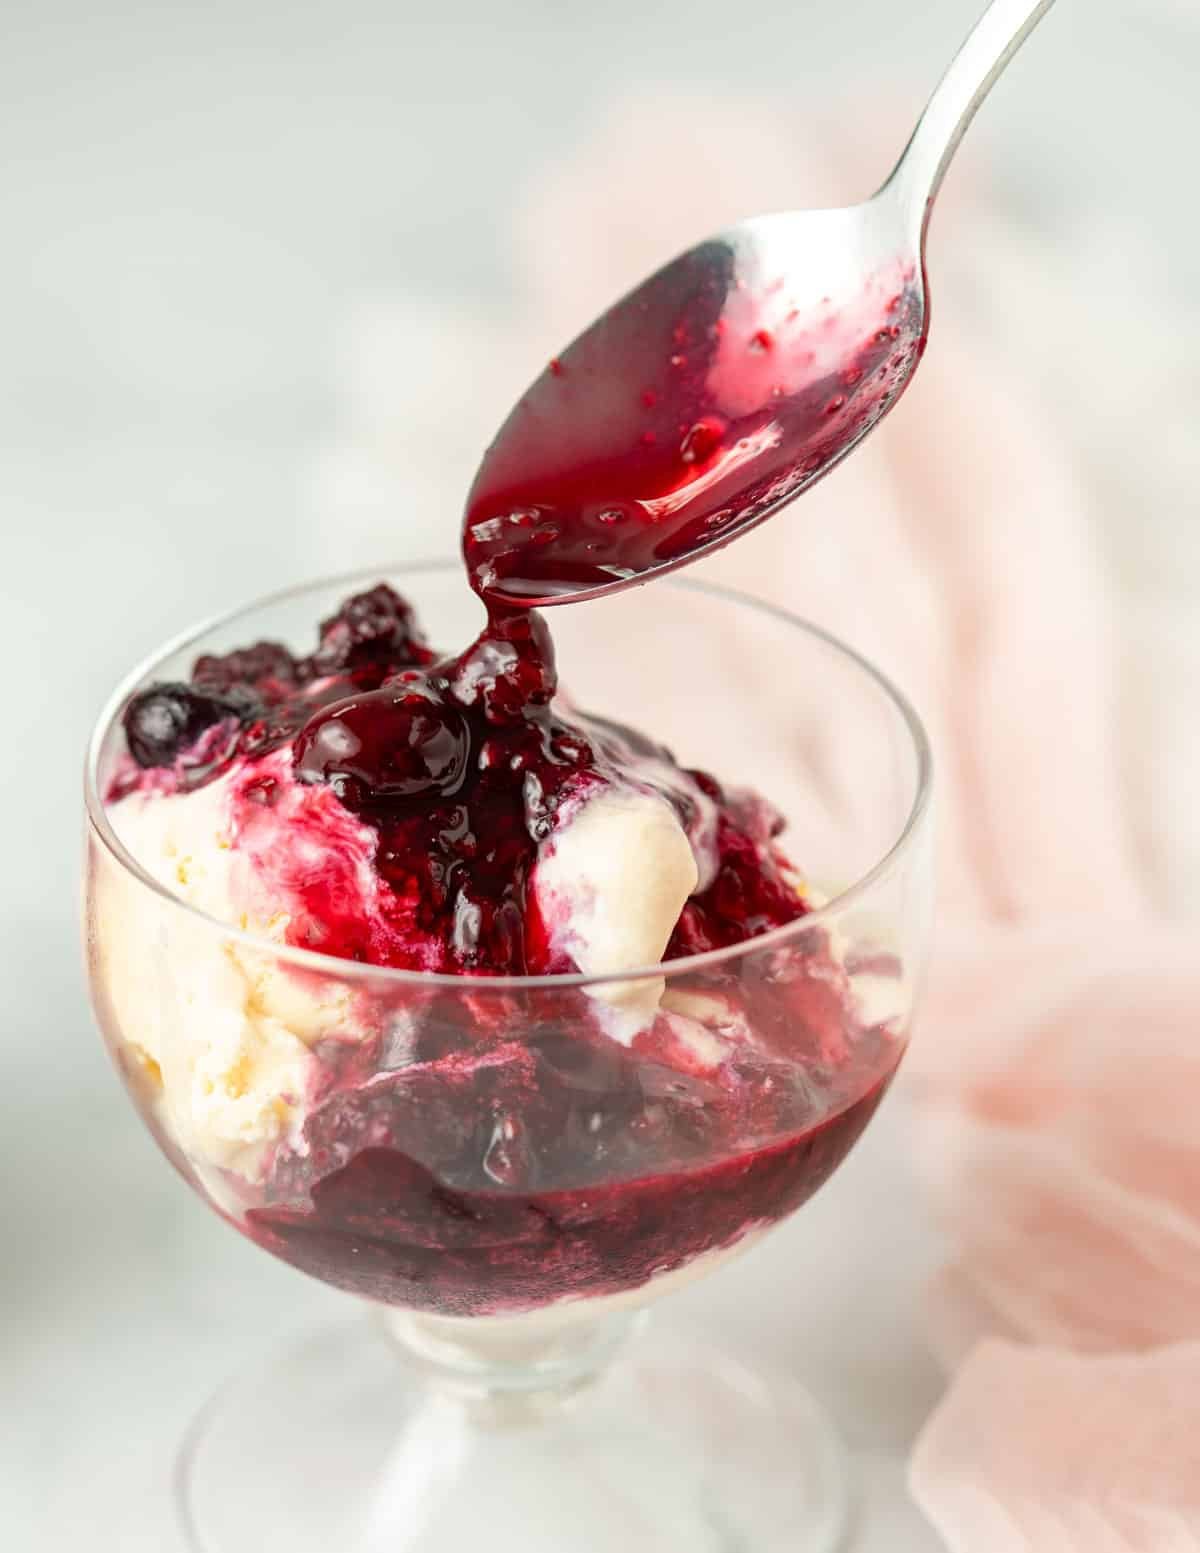 Spoon adding berry compote on top of vanilla ice cream in a bowl.
